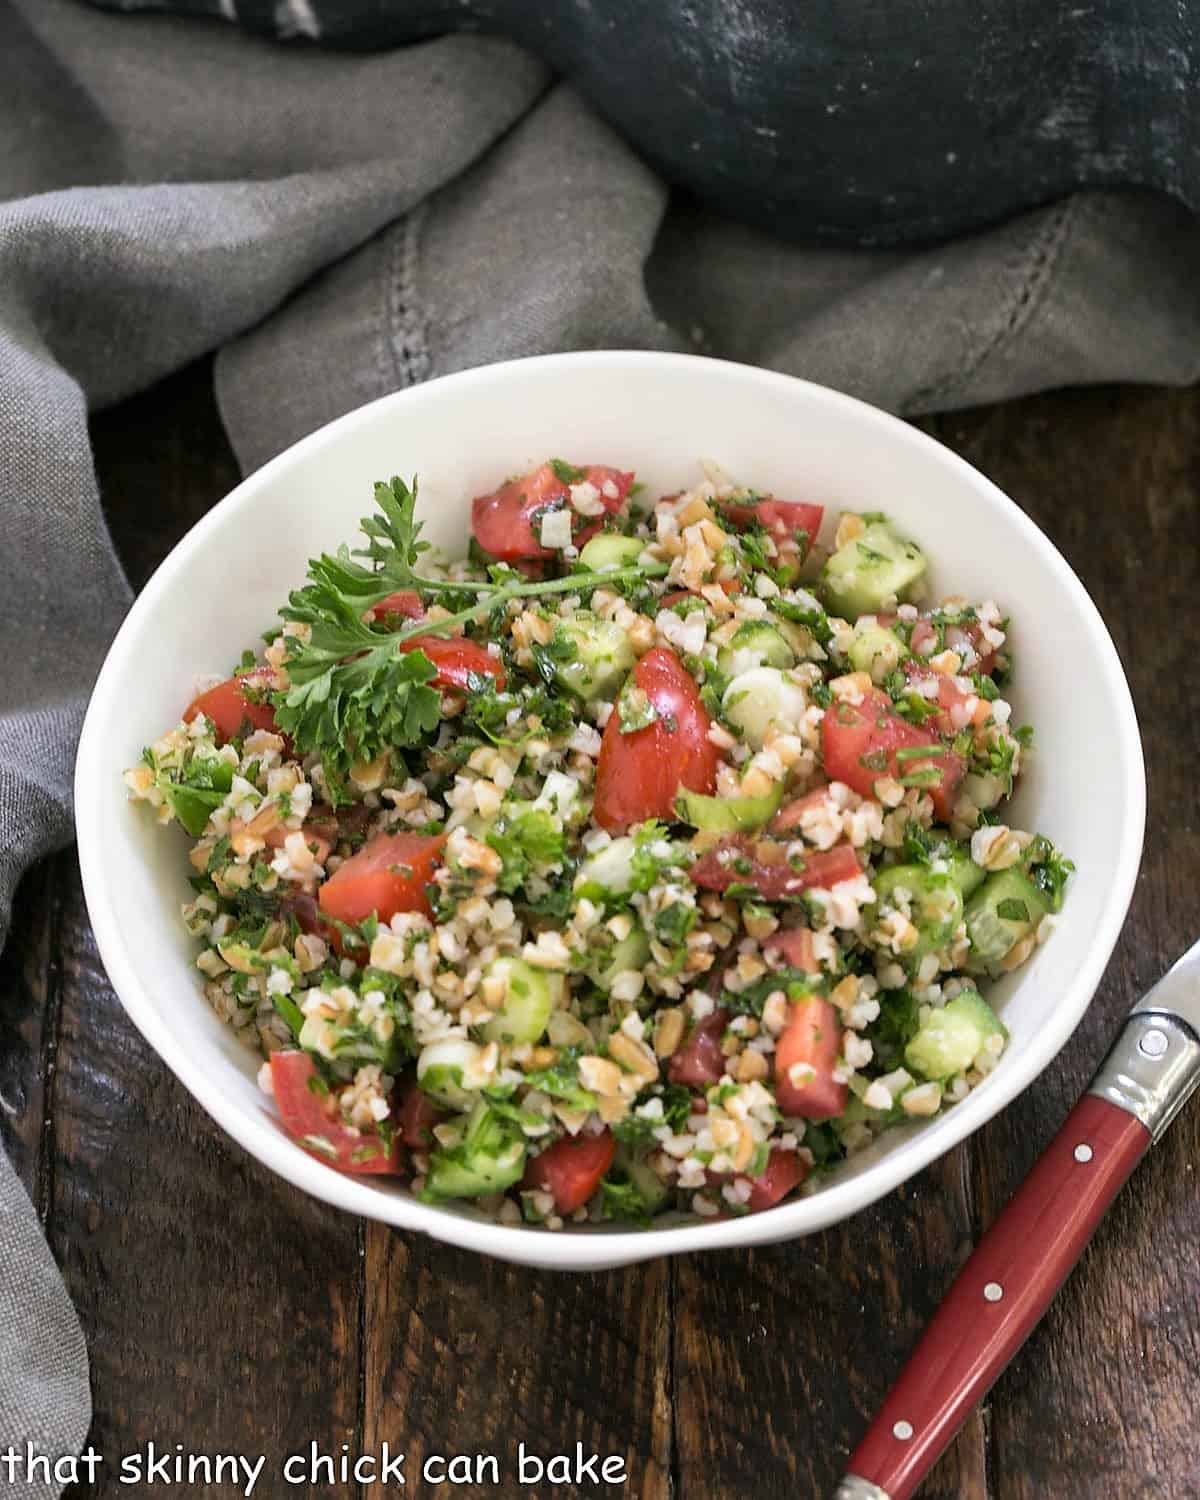 A single serving of tabouli salad in a white bowl with a fork.